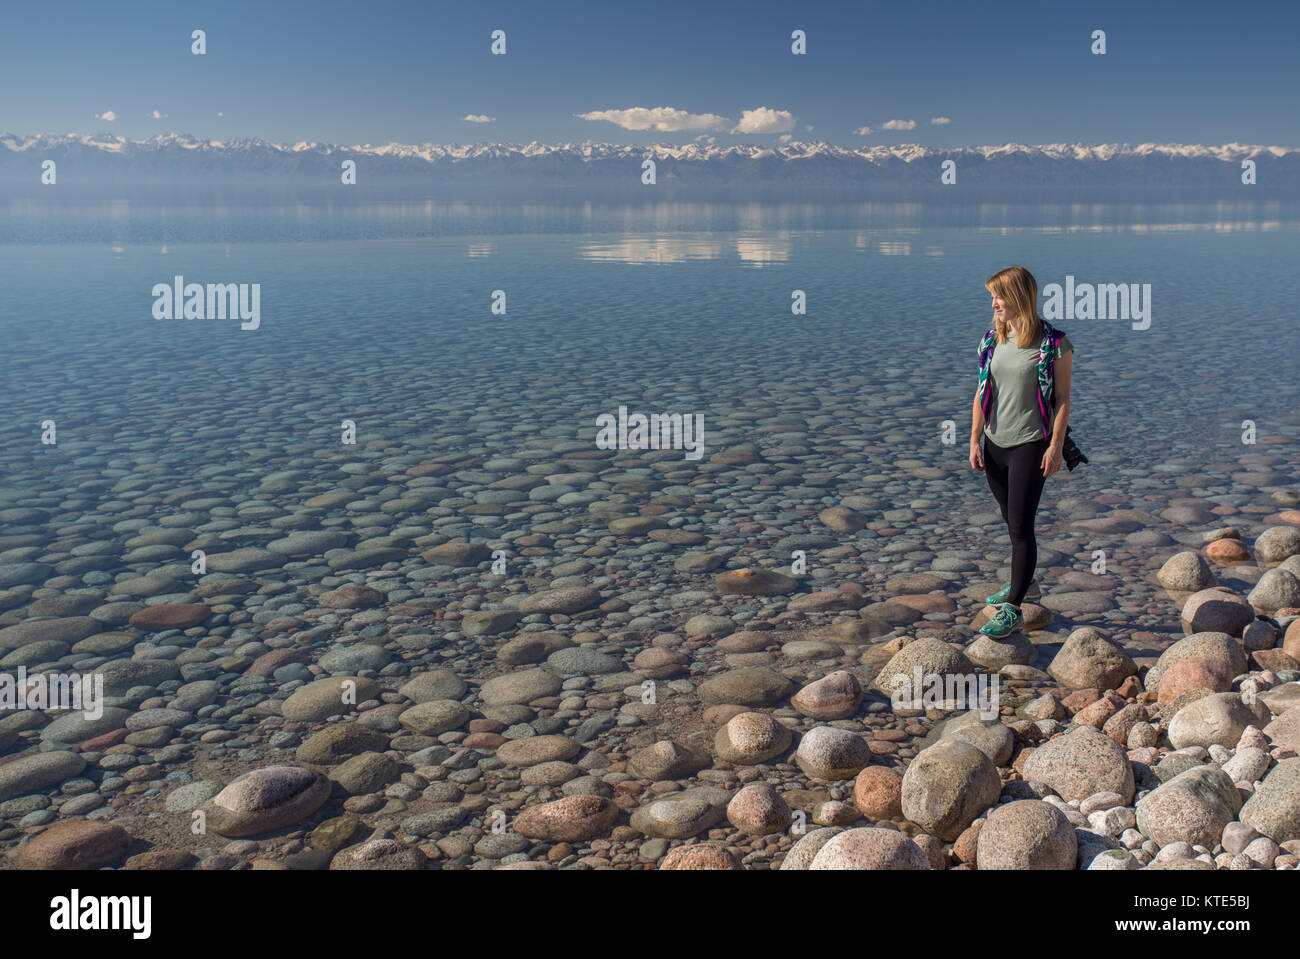 A female model on the southern shore of Issyk-Kol in Kyrgyzstan, with the mountains of the north shore reflected in the background. Stock Photo